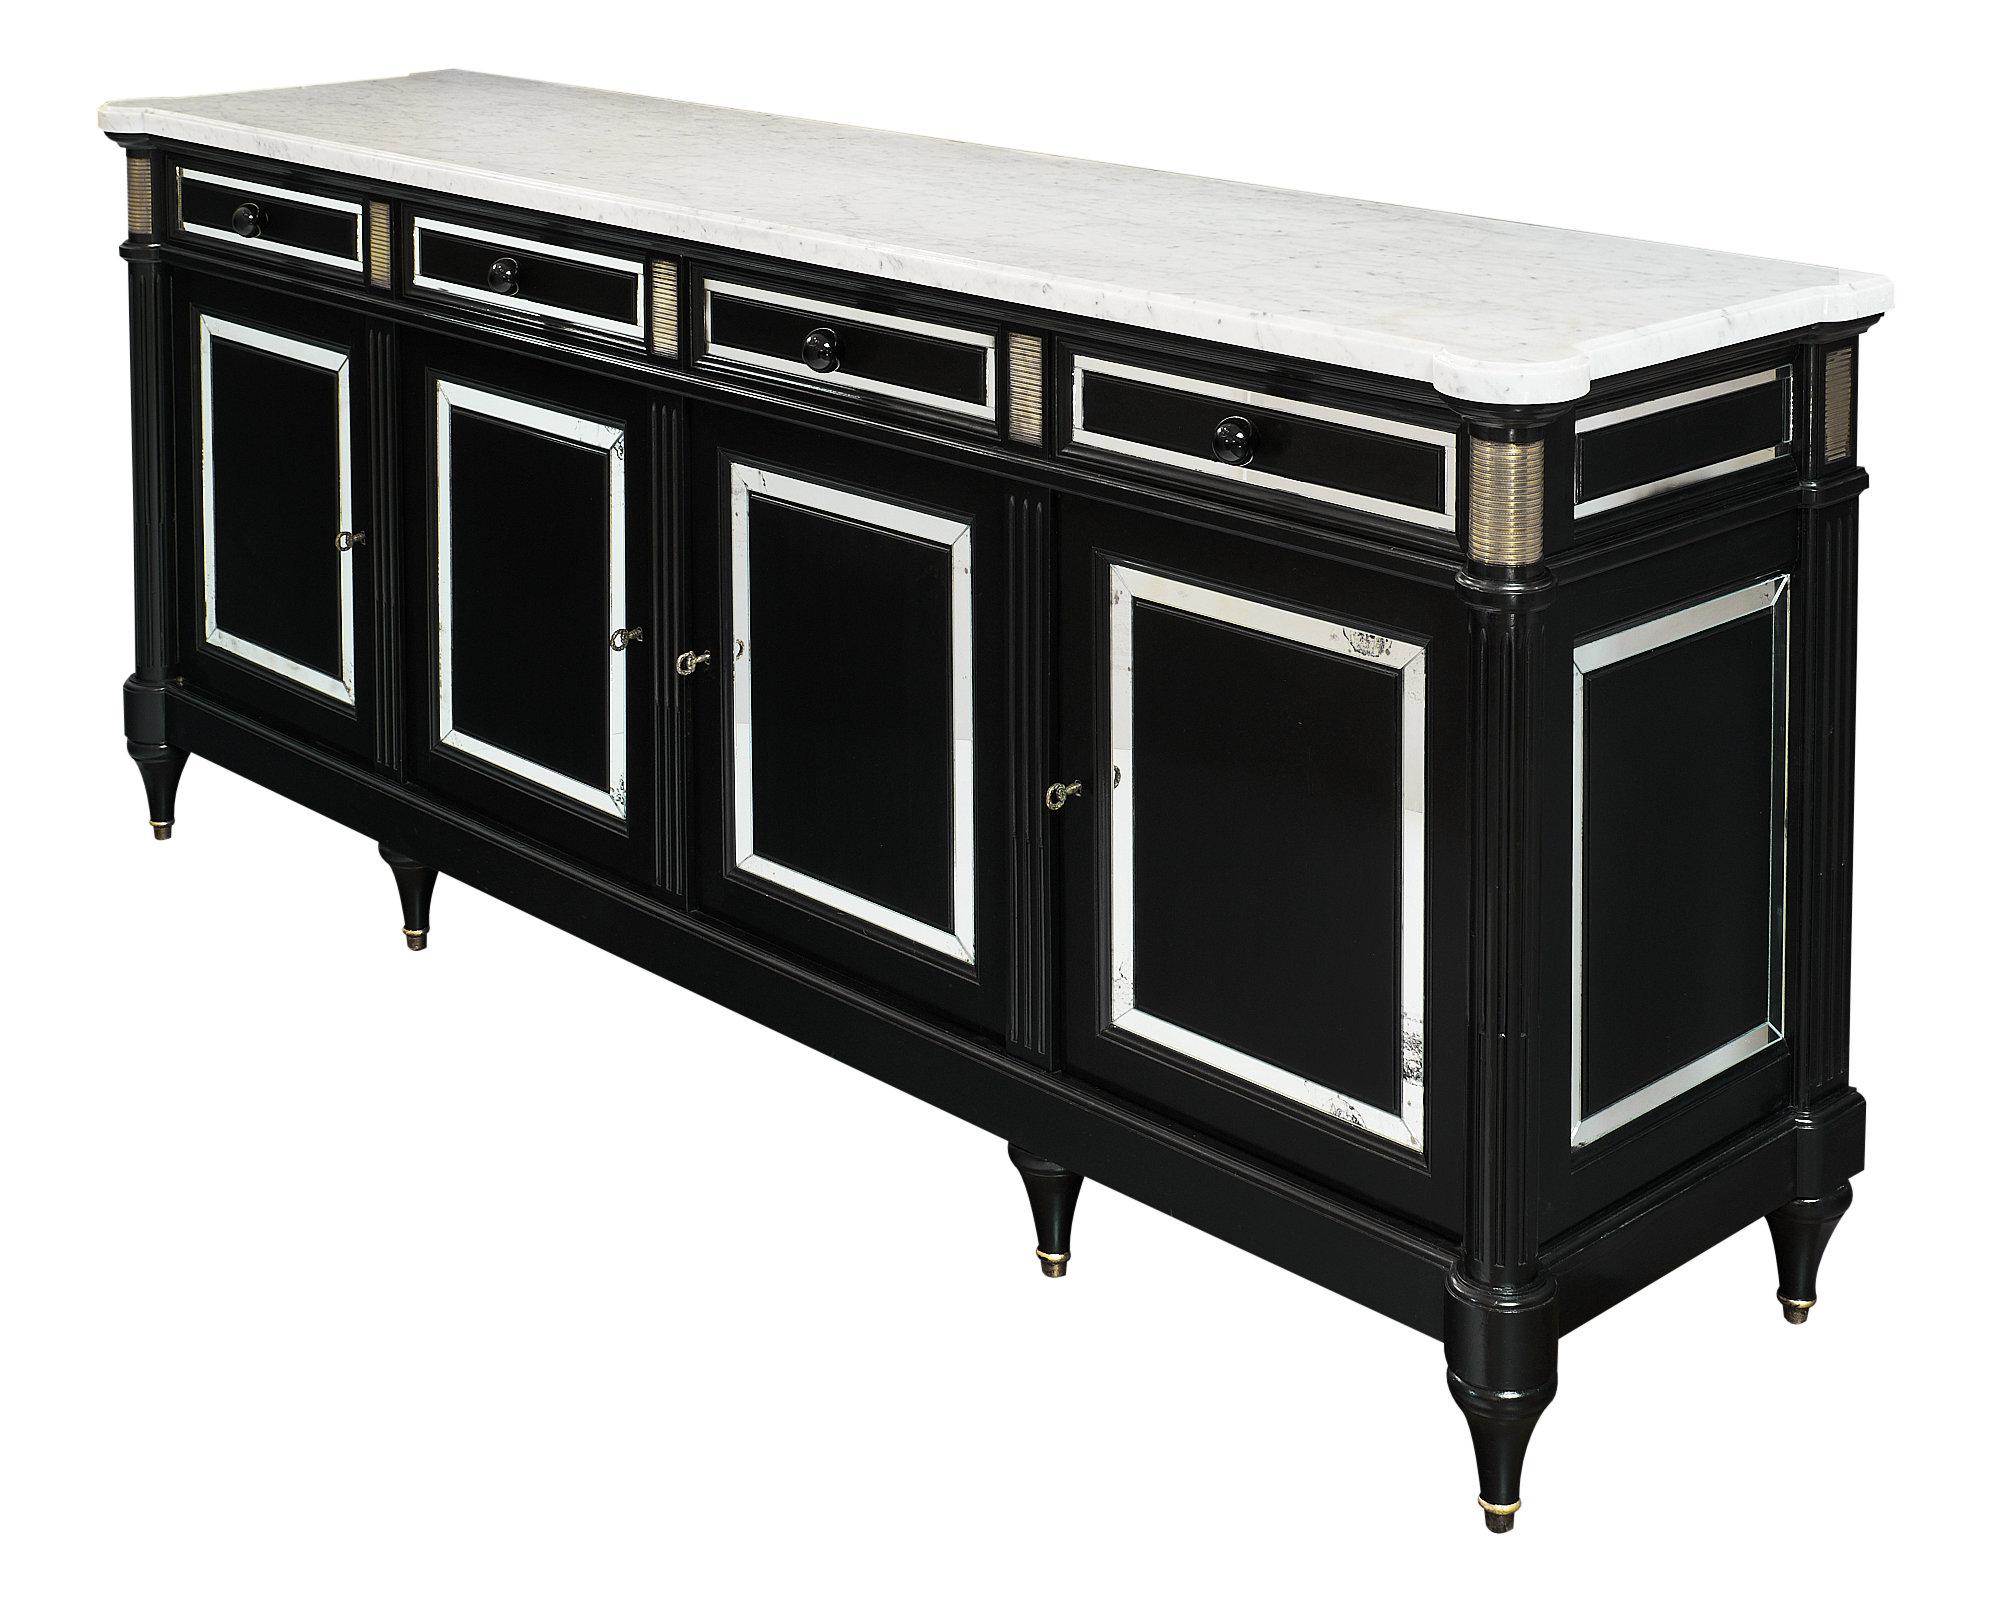 Louis XVI style French buffet made of ebonized mahogany finished with a lustrous French polish. This piece is topped with an intact Carrara marble slab and features brass trim details. Four dovetailed drawers have Murano glass knobs, and the four